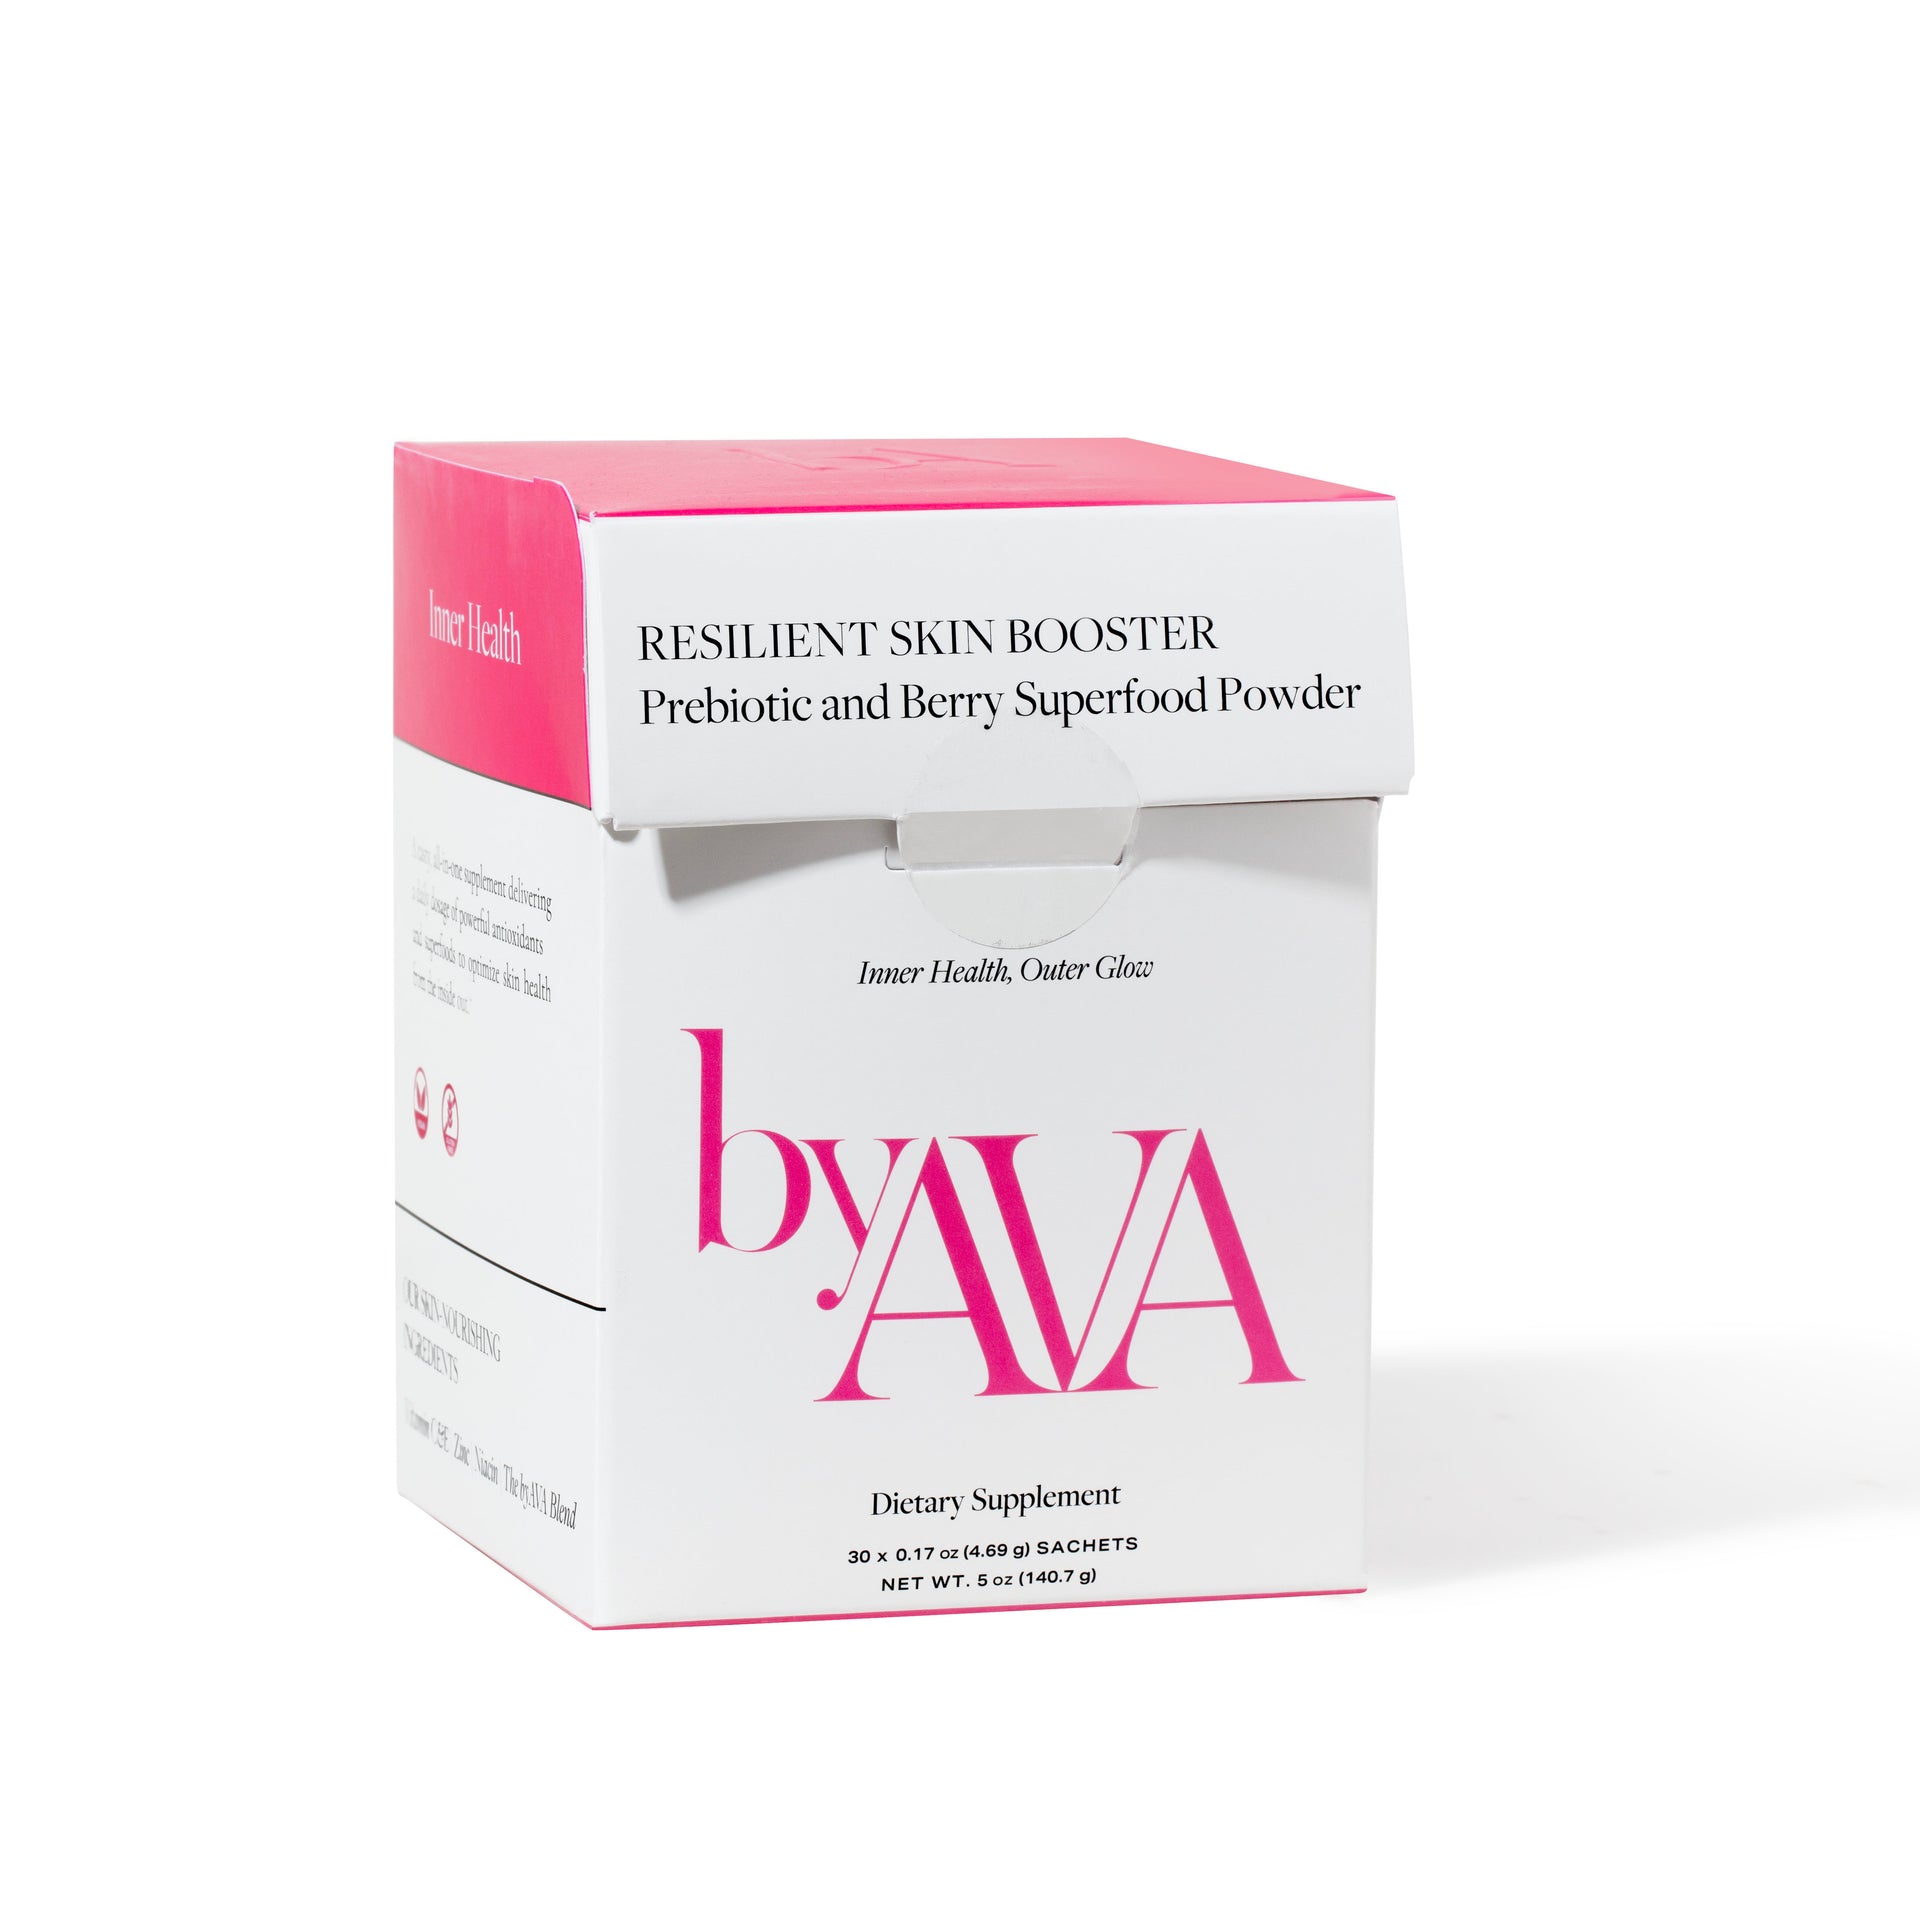 Resilient Skin Booster, box side